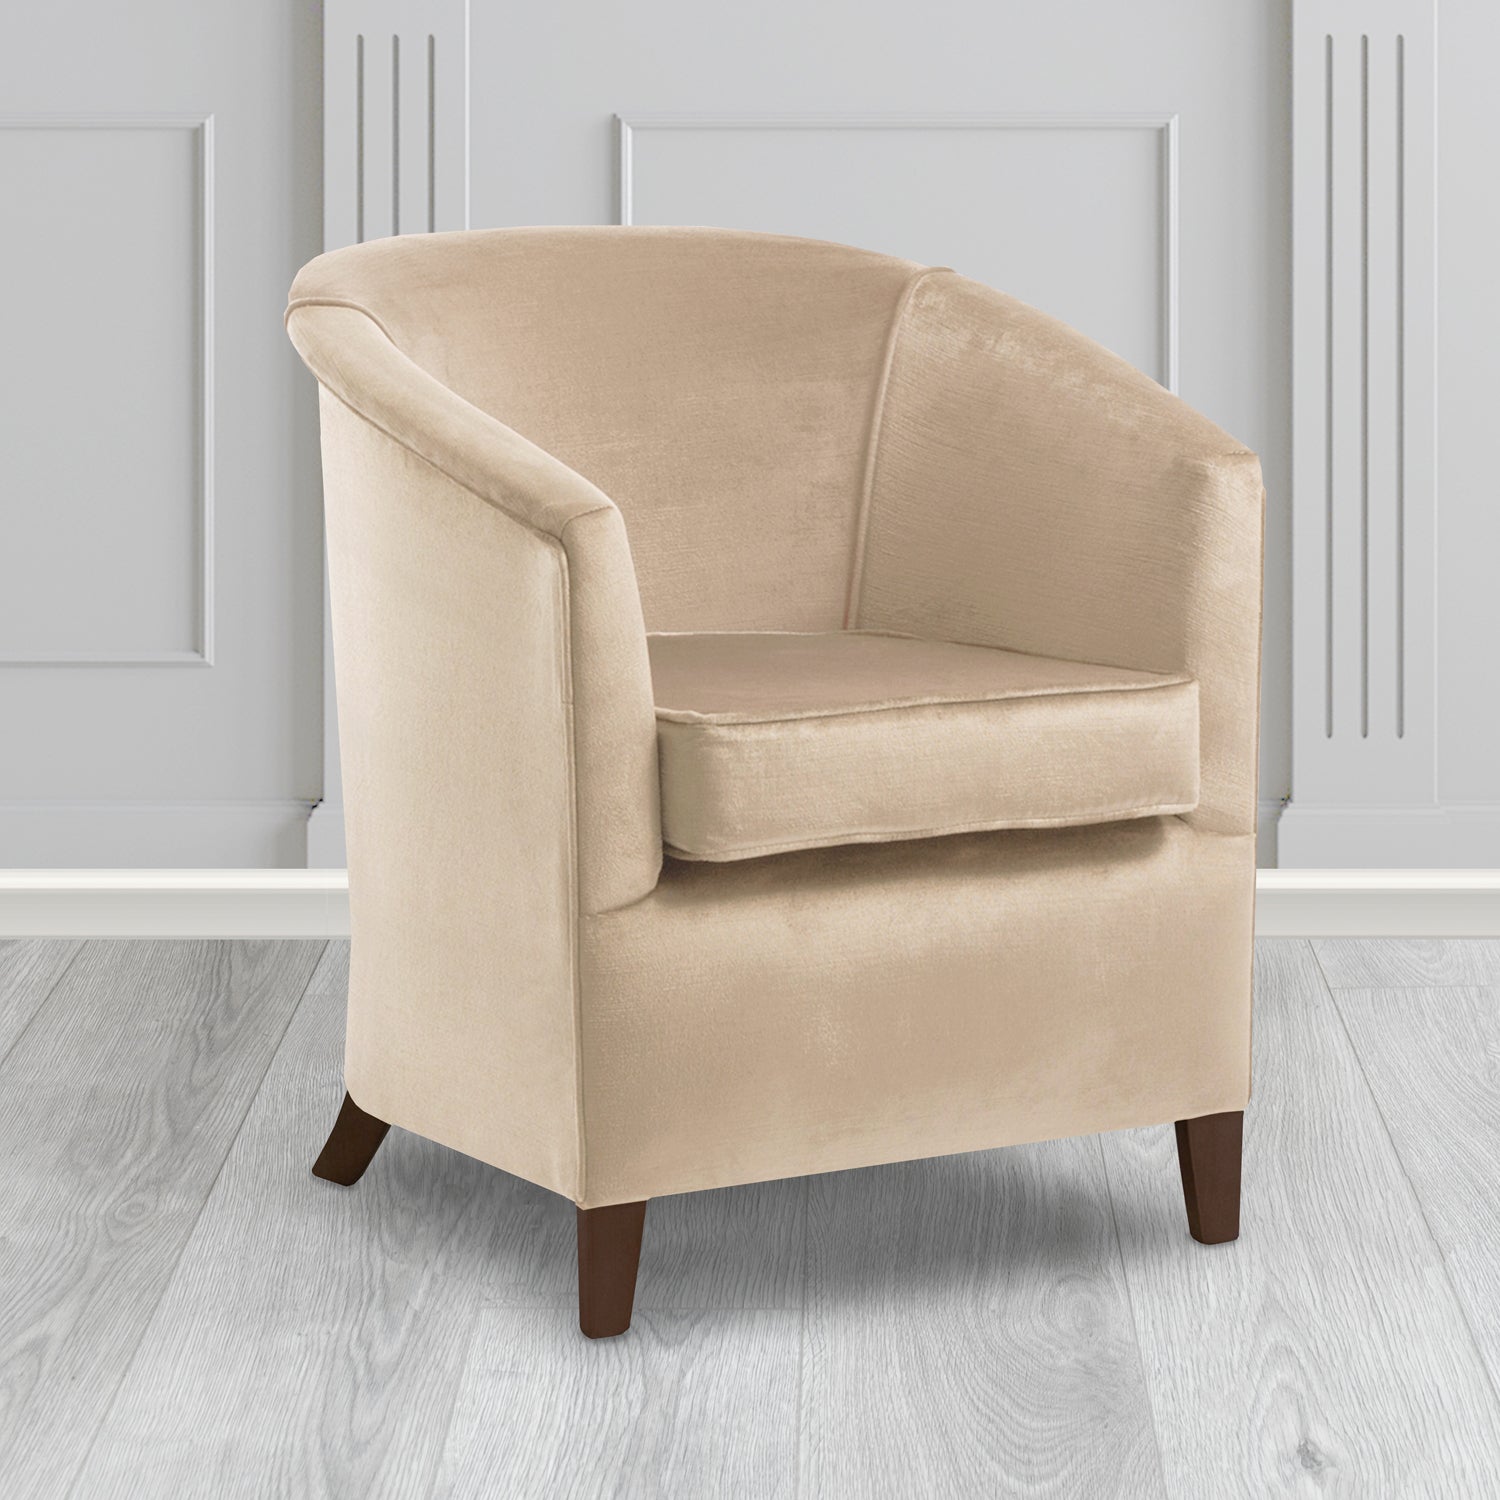 Jasmine Tub Chair in Noble 837 Stone Crib 5 Velvet Fabric - Water Resistant - The Tub Chair Shop